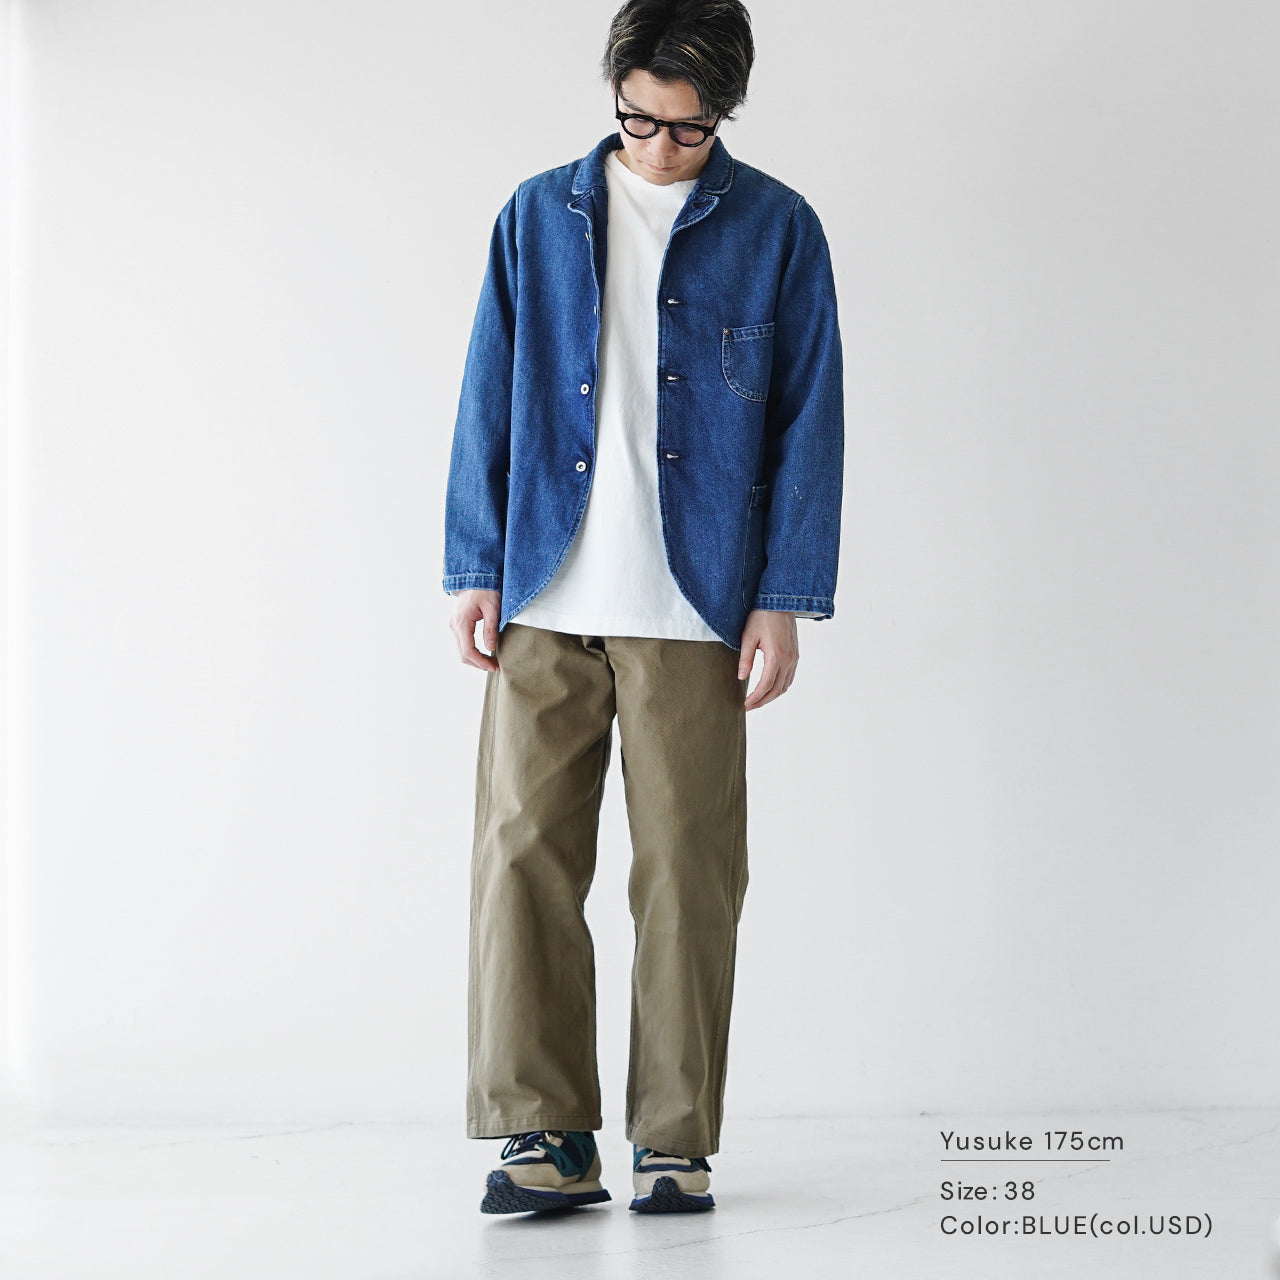 ORDINARY FITS オーディナリーフィッツ  ワーク テーラード カバーオール ジャケット WORK TAILORED COVERALL (USED)  OFC-J003 【送料無料】